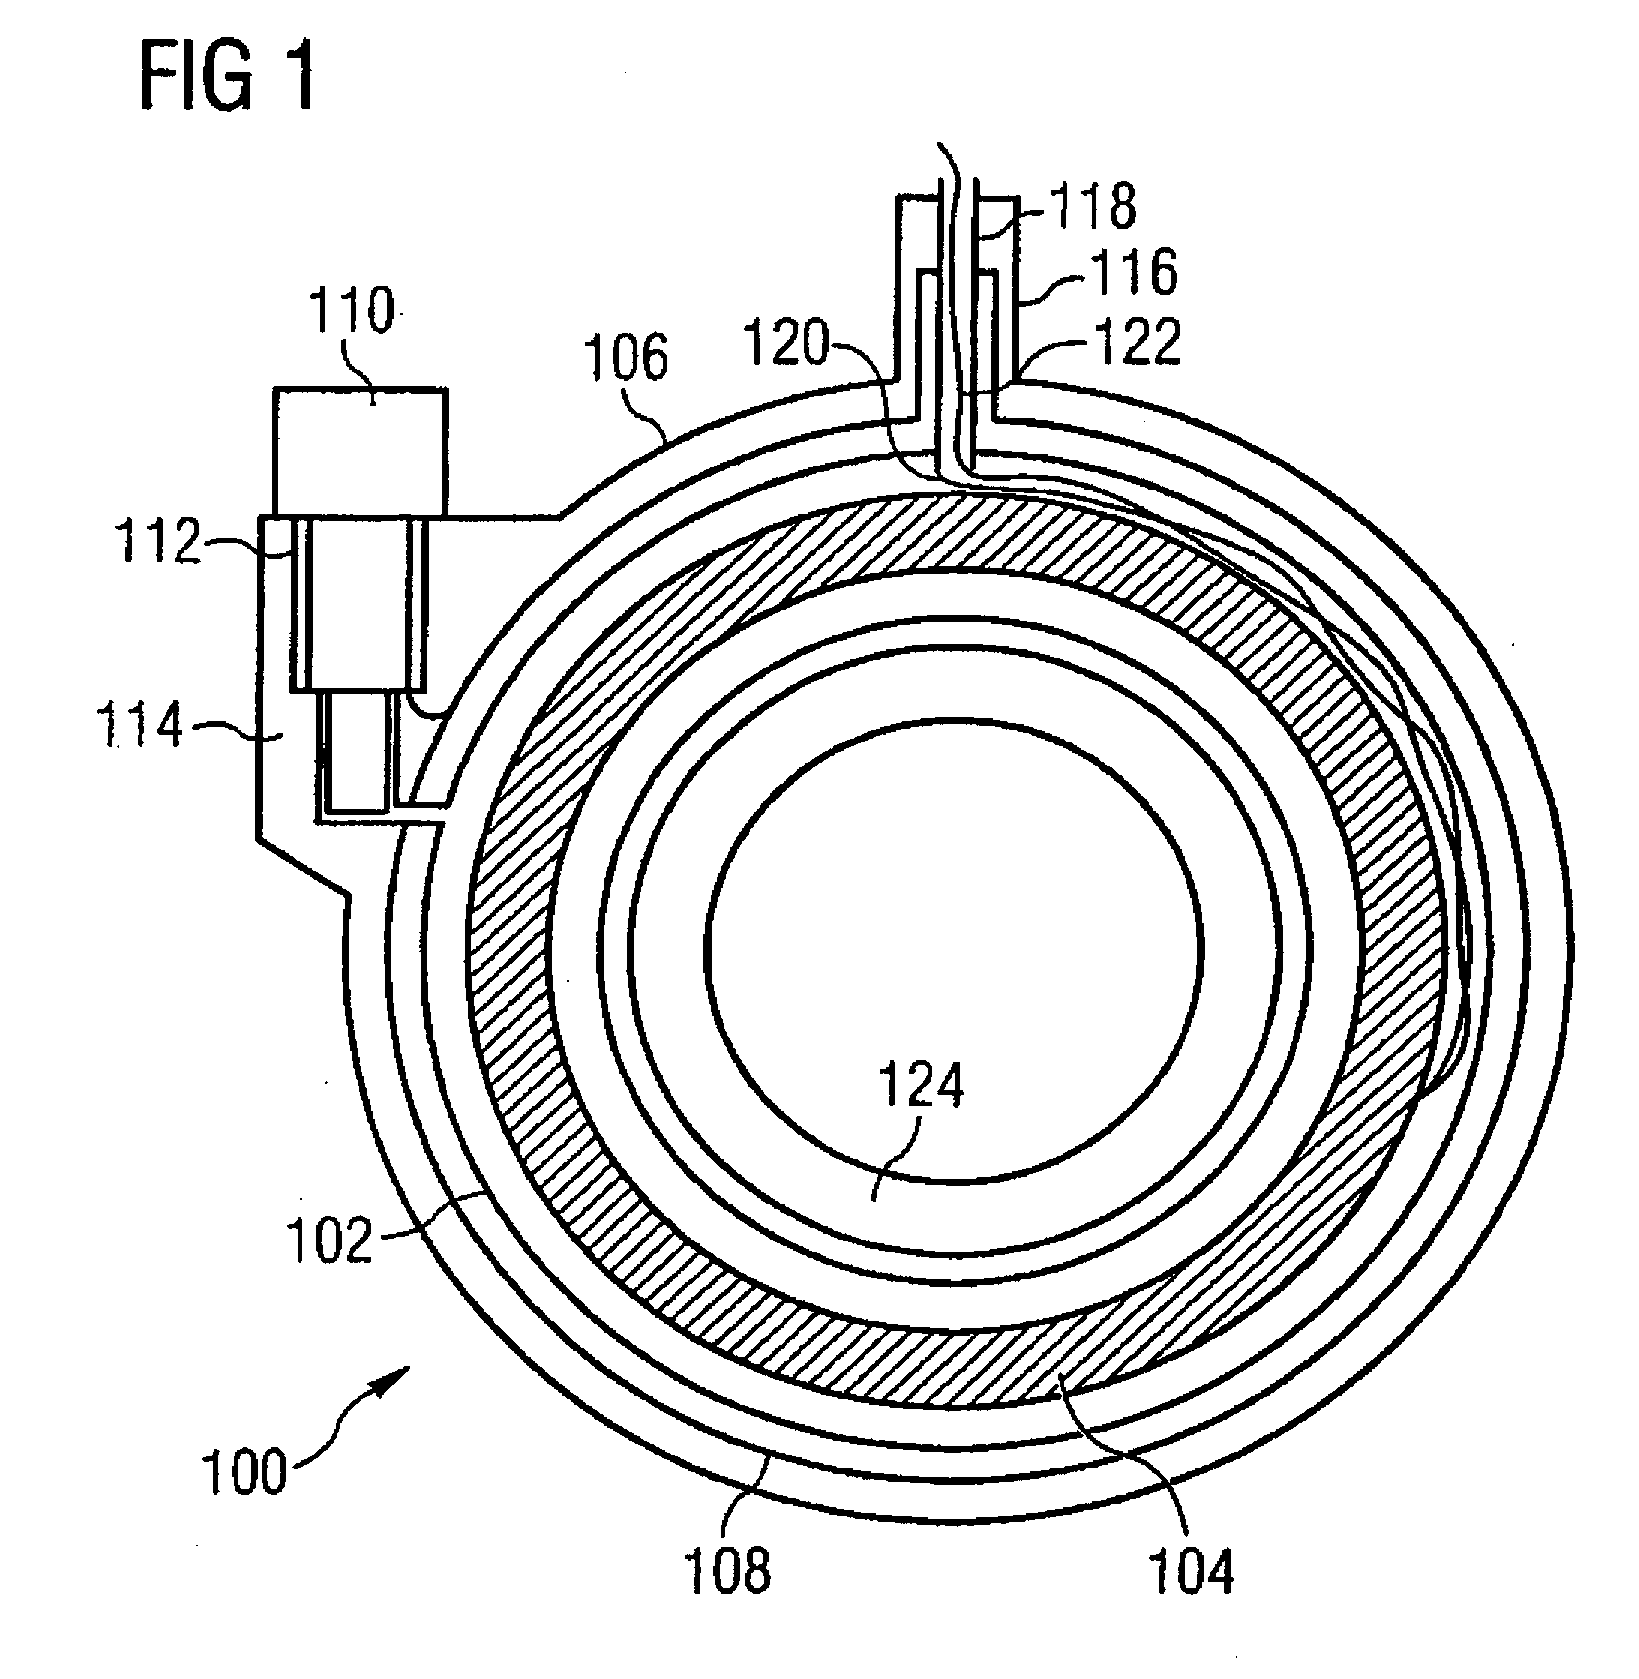 Coil energization apparatus and method of energizing a superconductive coil